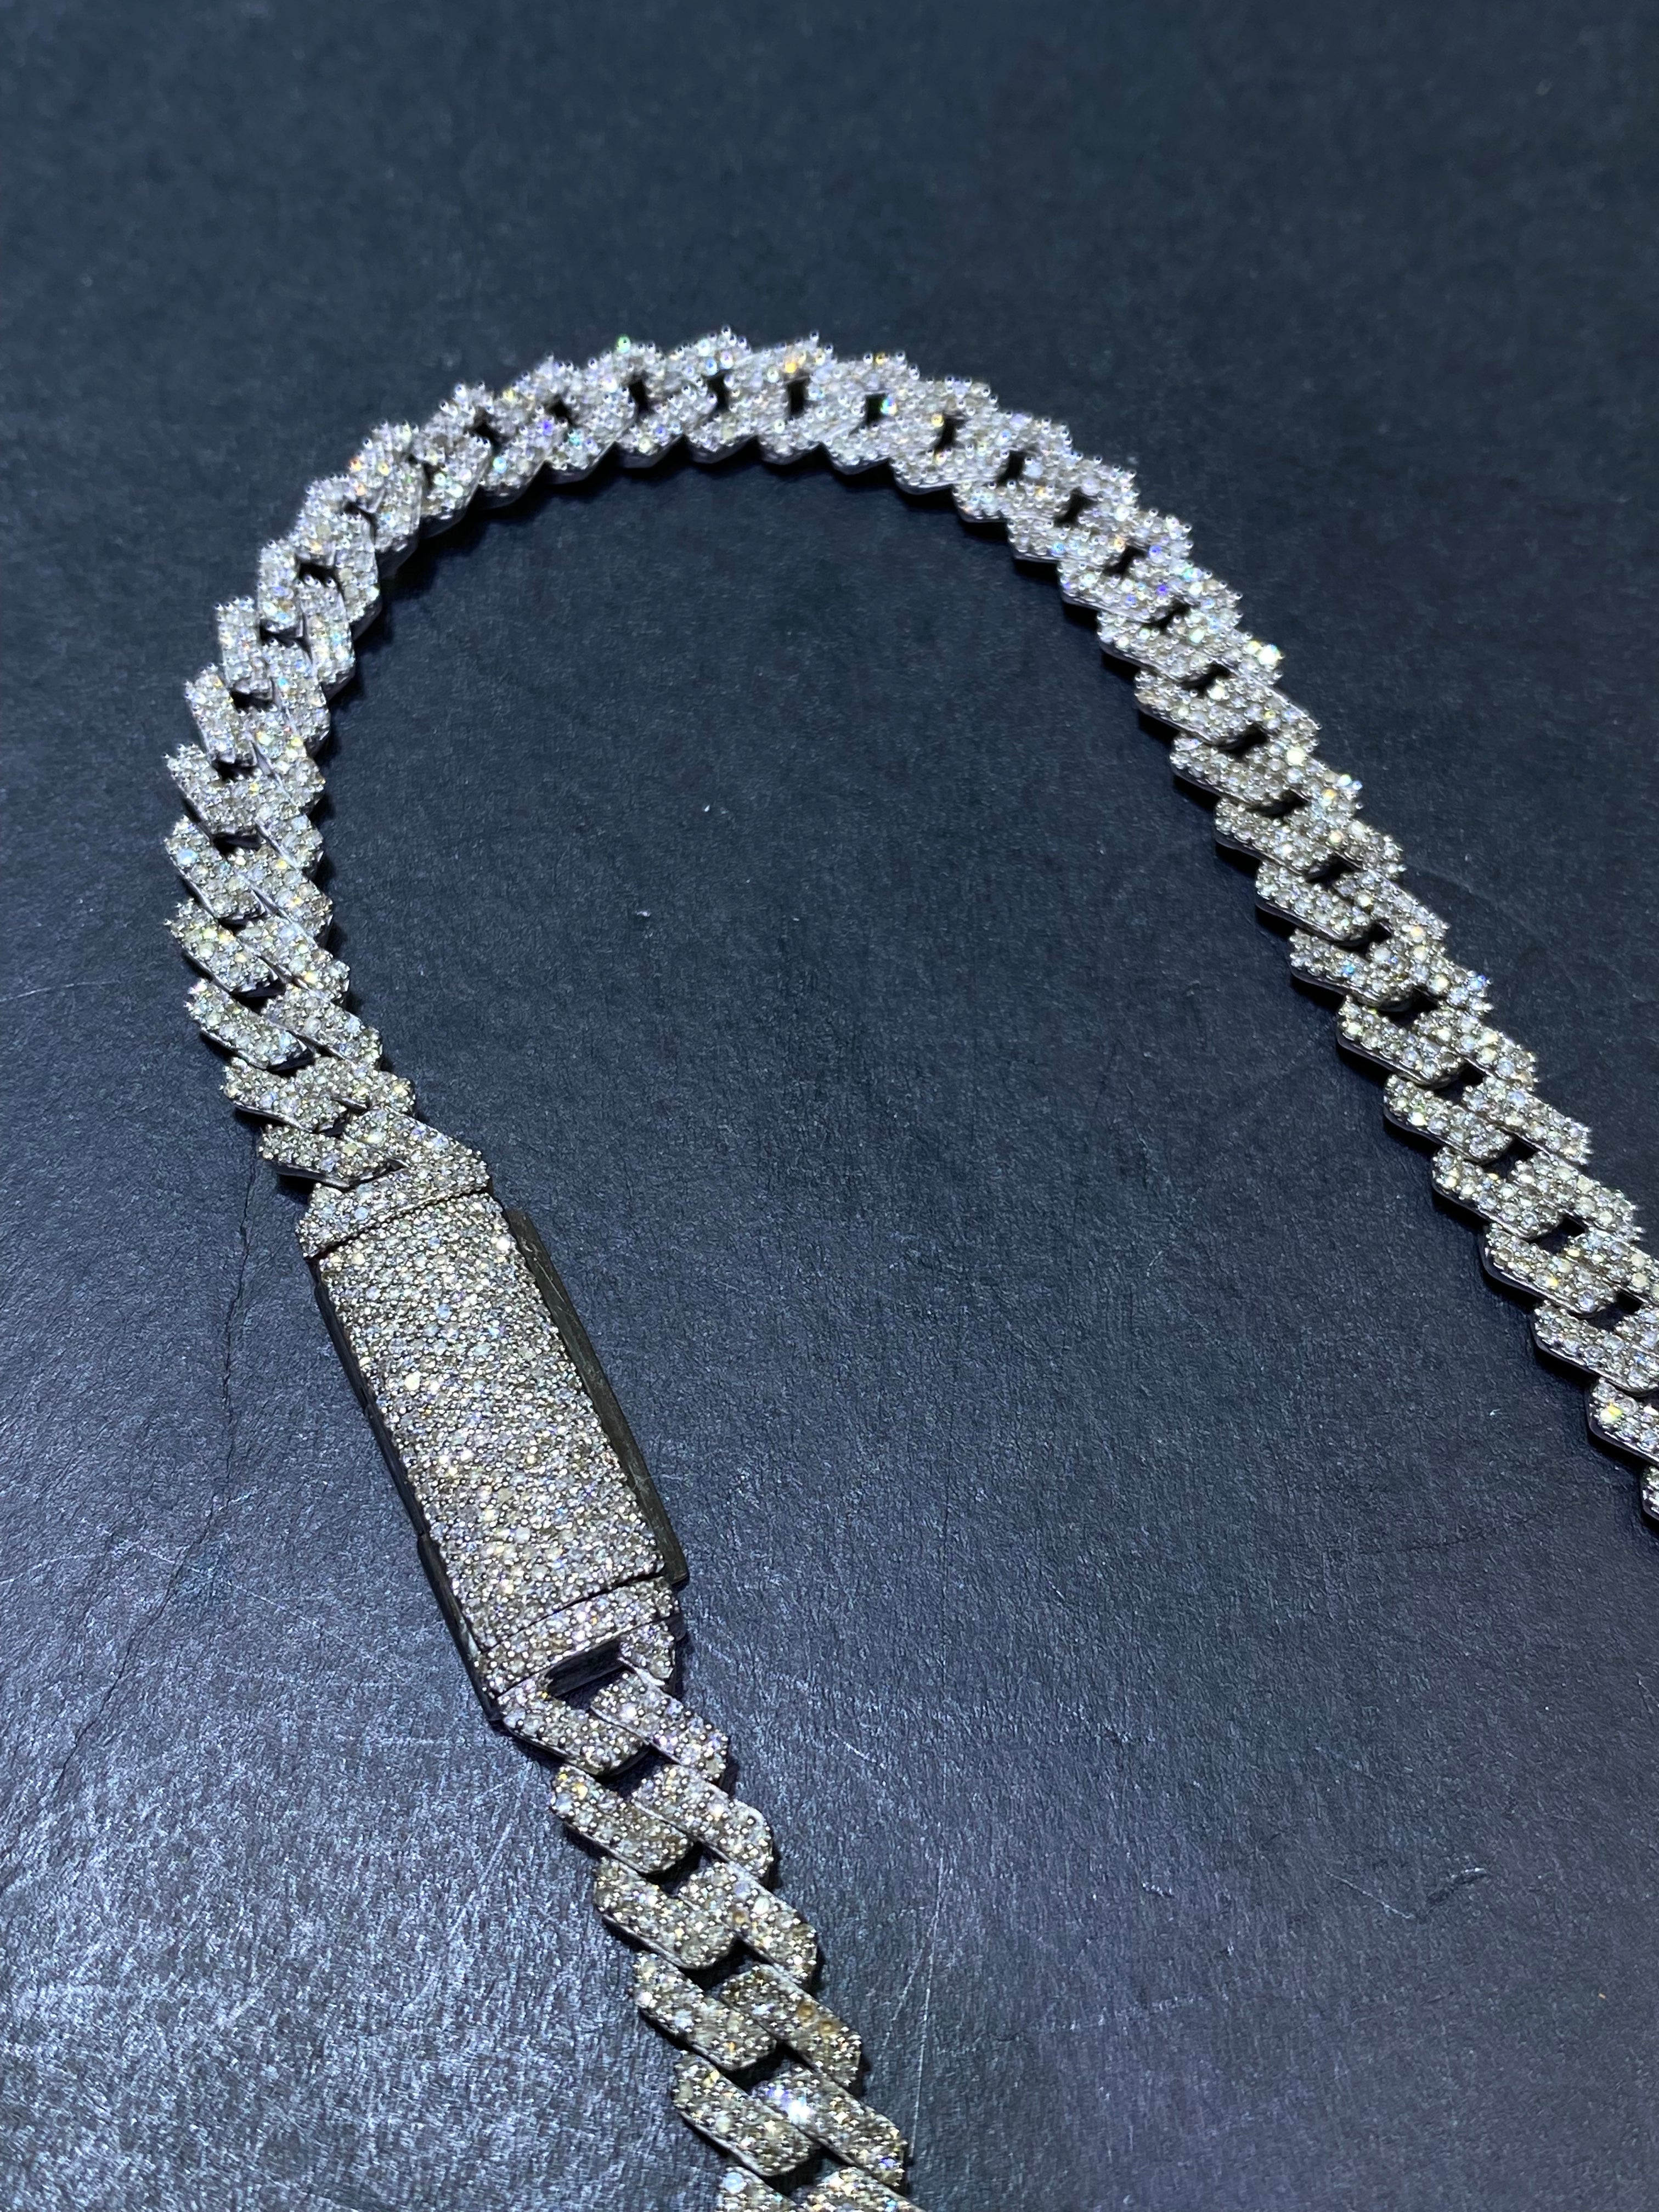 vs1 "iced bust down cuban link" chain 10 cts t.w. 14k gold 60 grams made here at renee de paris jewelry for sale online on google